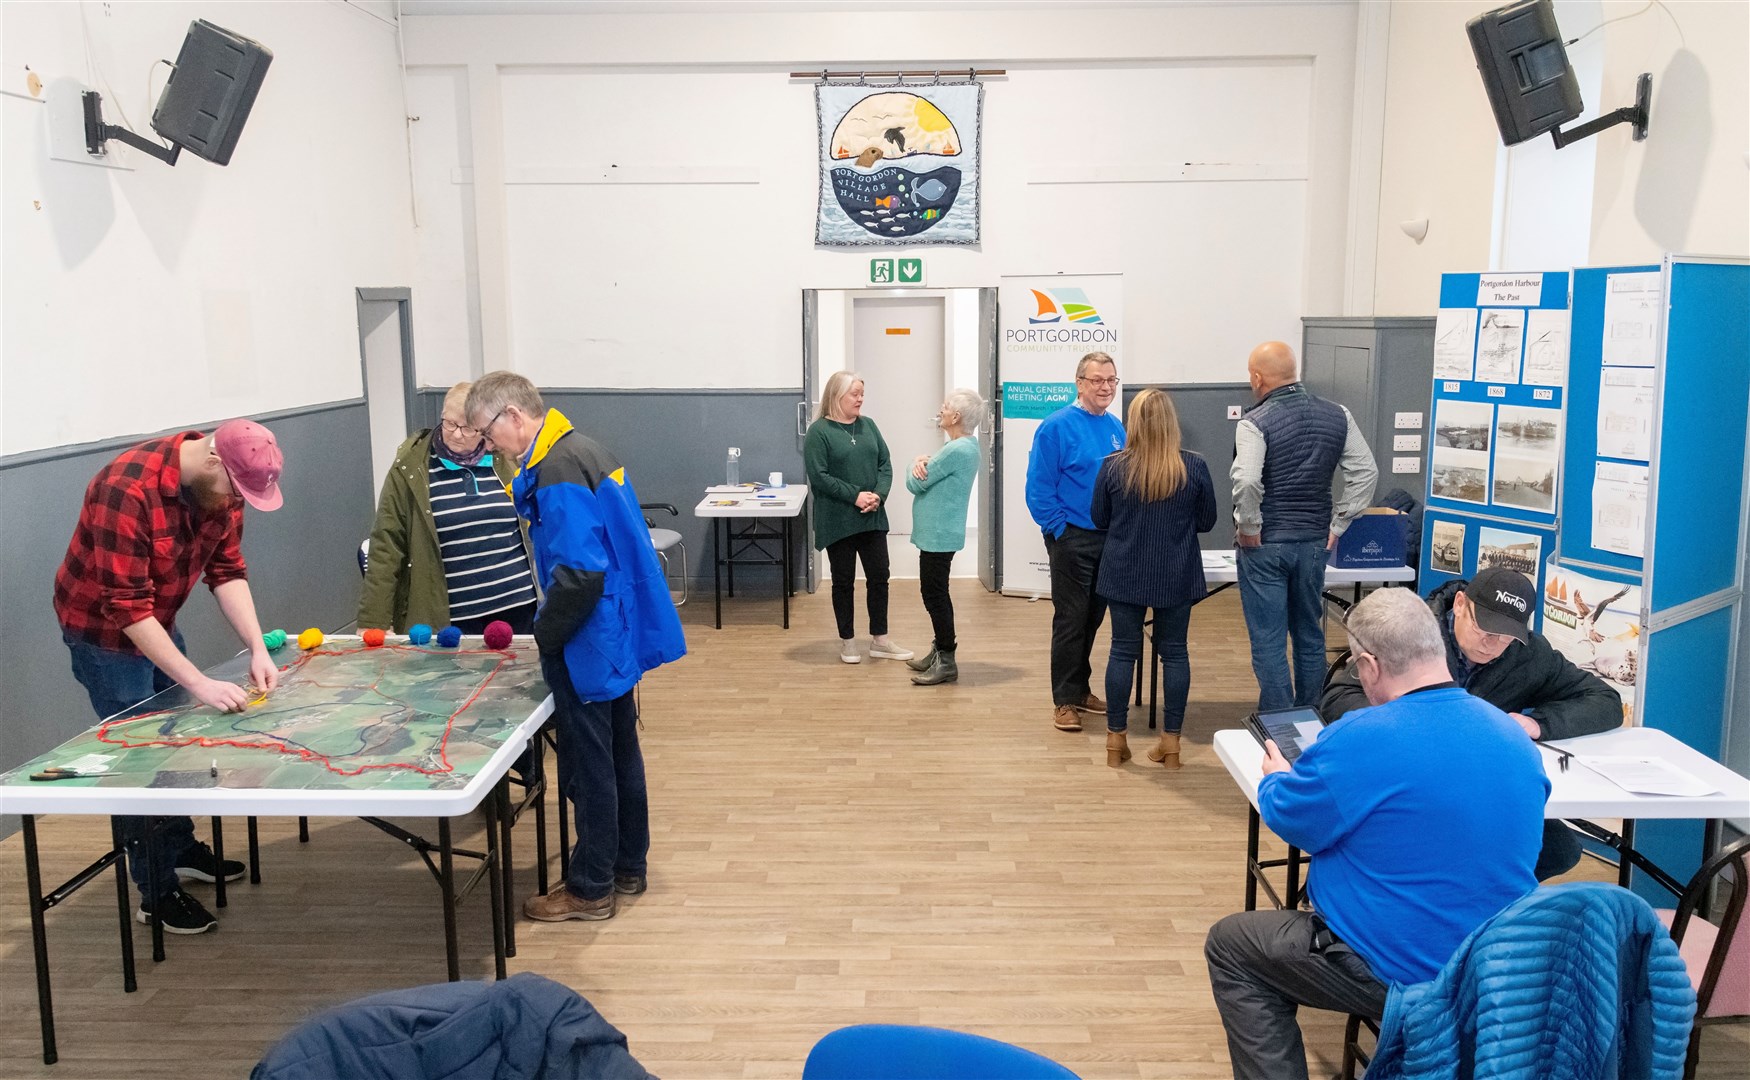 Three drop-in sessions were held as part of the consultation. Picture: Beth Taylor